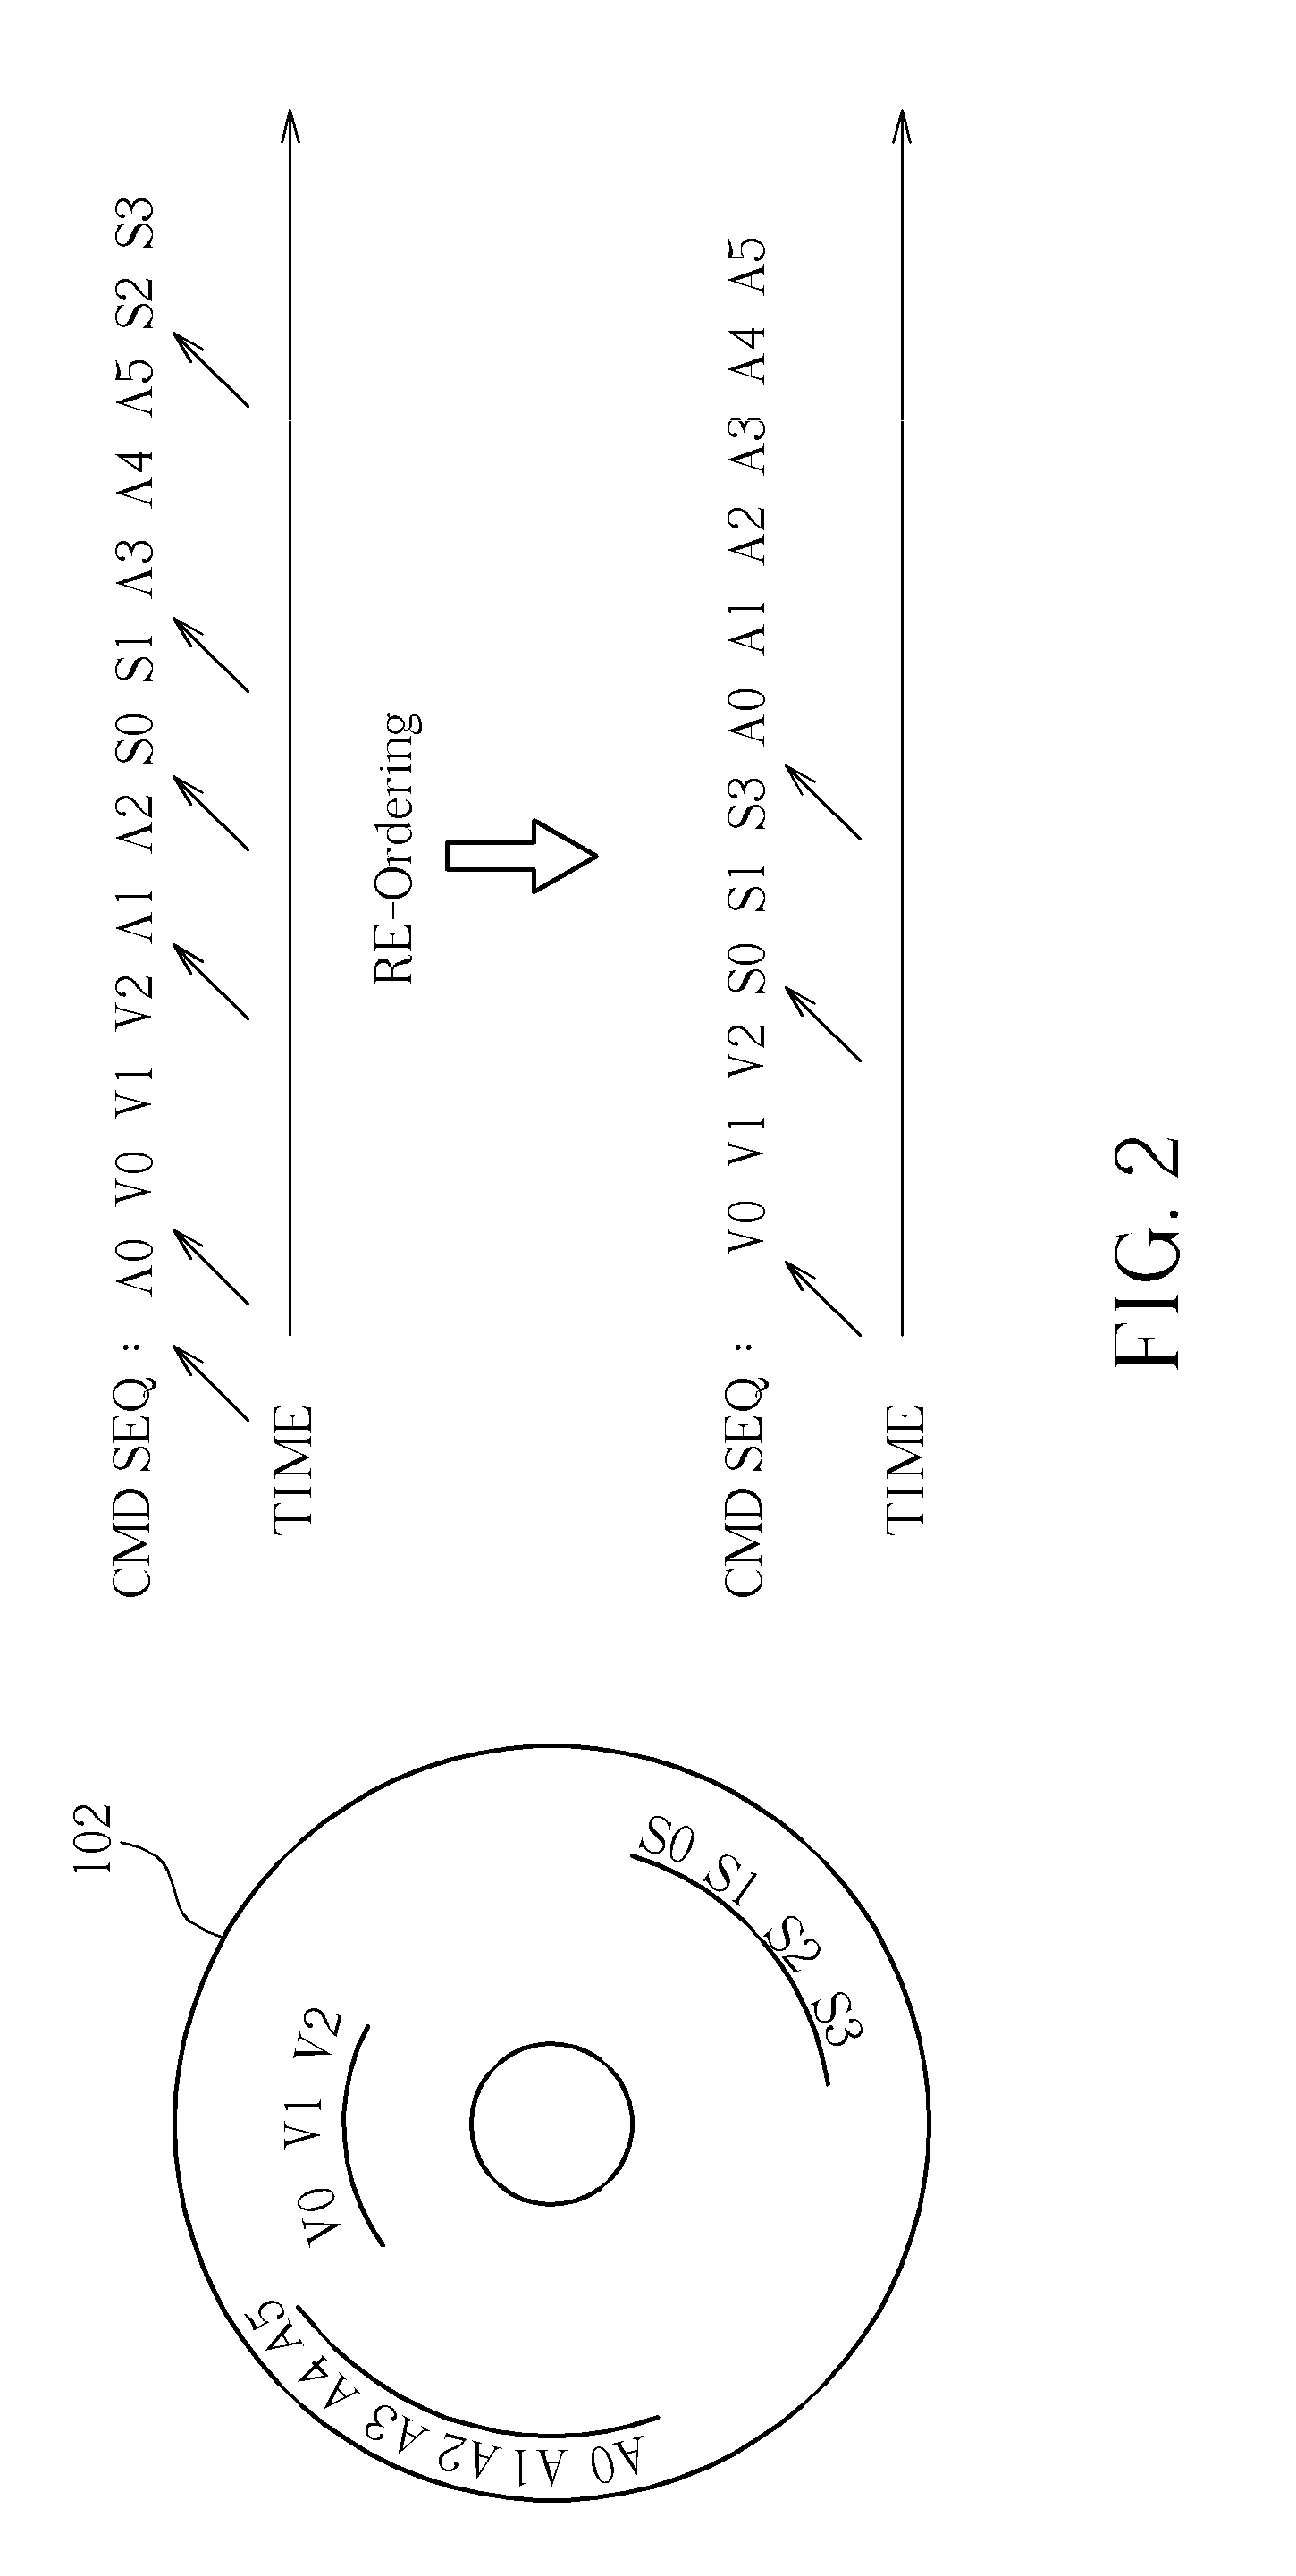 Method of Enhancing Command Executing Performance of Disc Drive